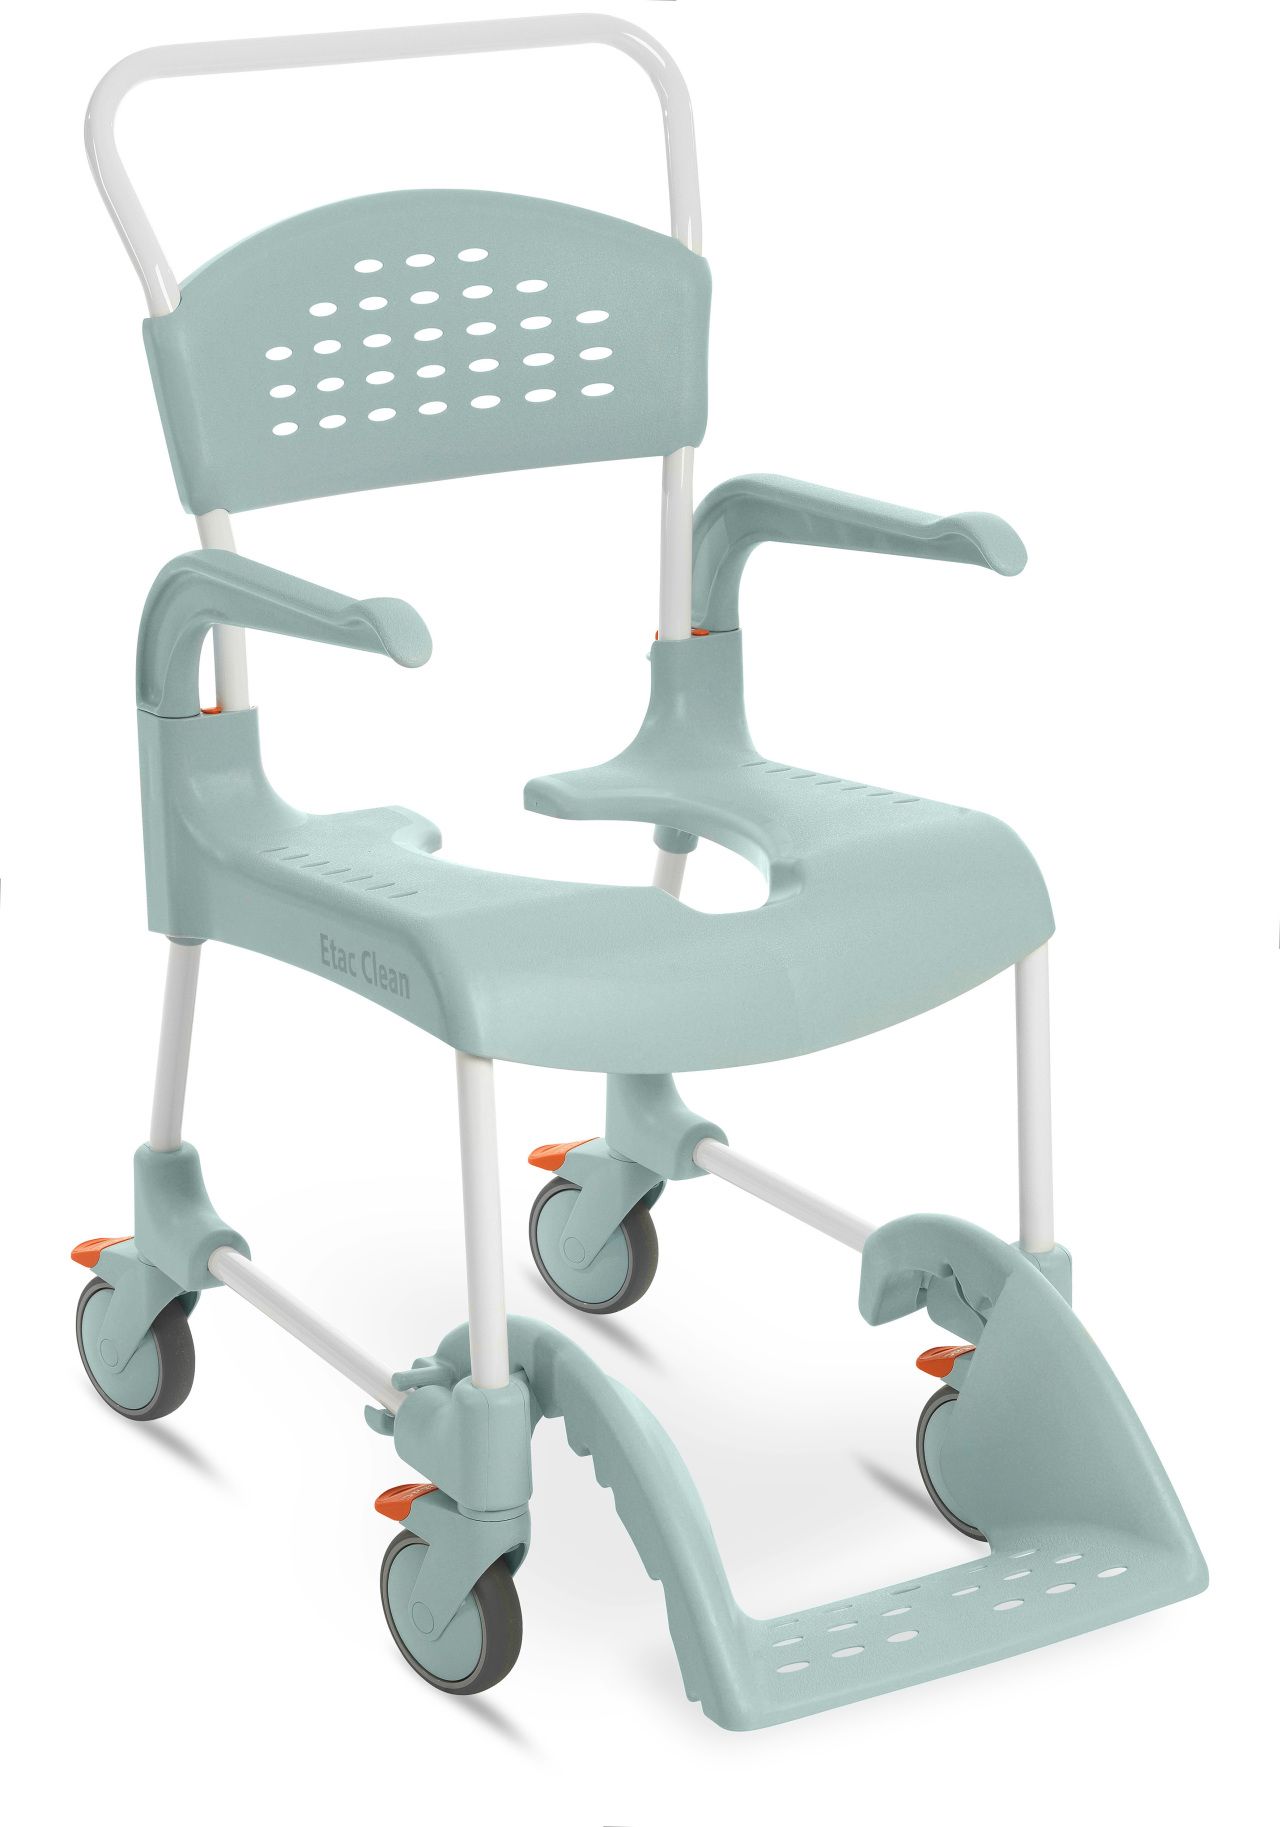 Shower Commode Chairs Special Needs Bathroom Shower Wheelchair Toilet Chair